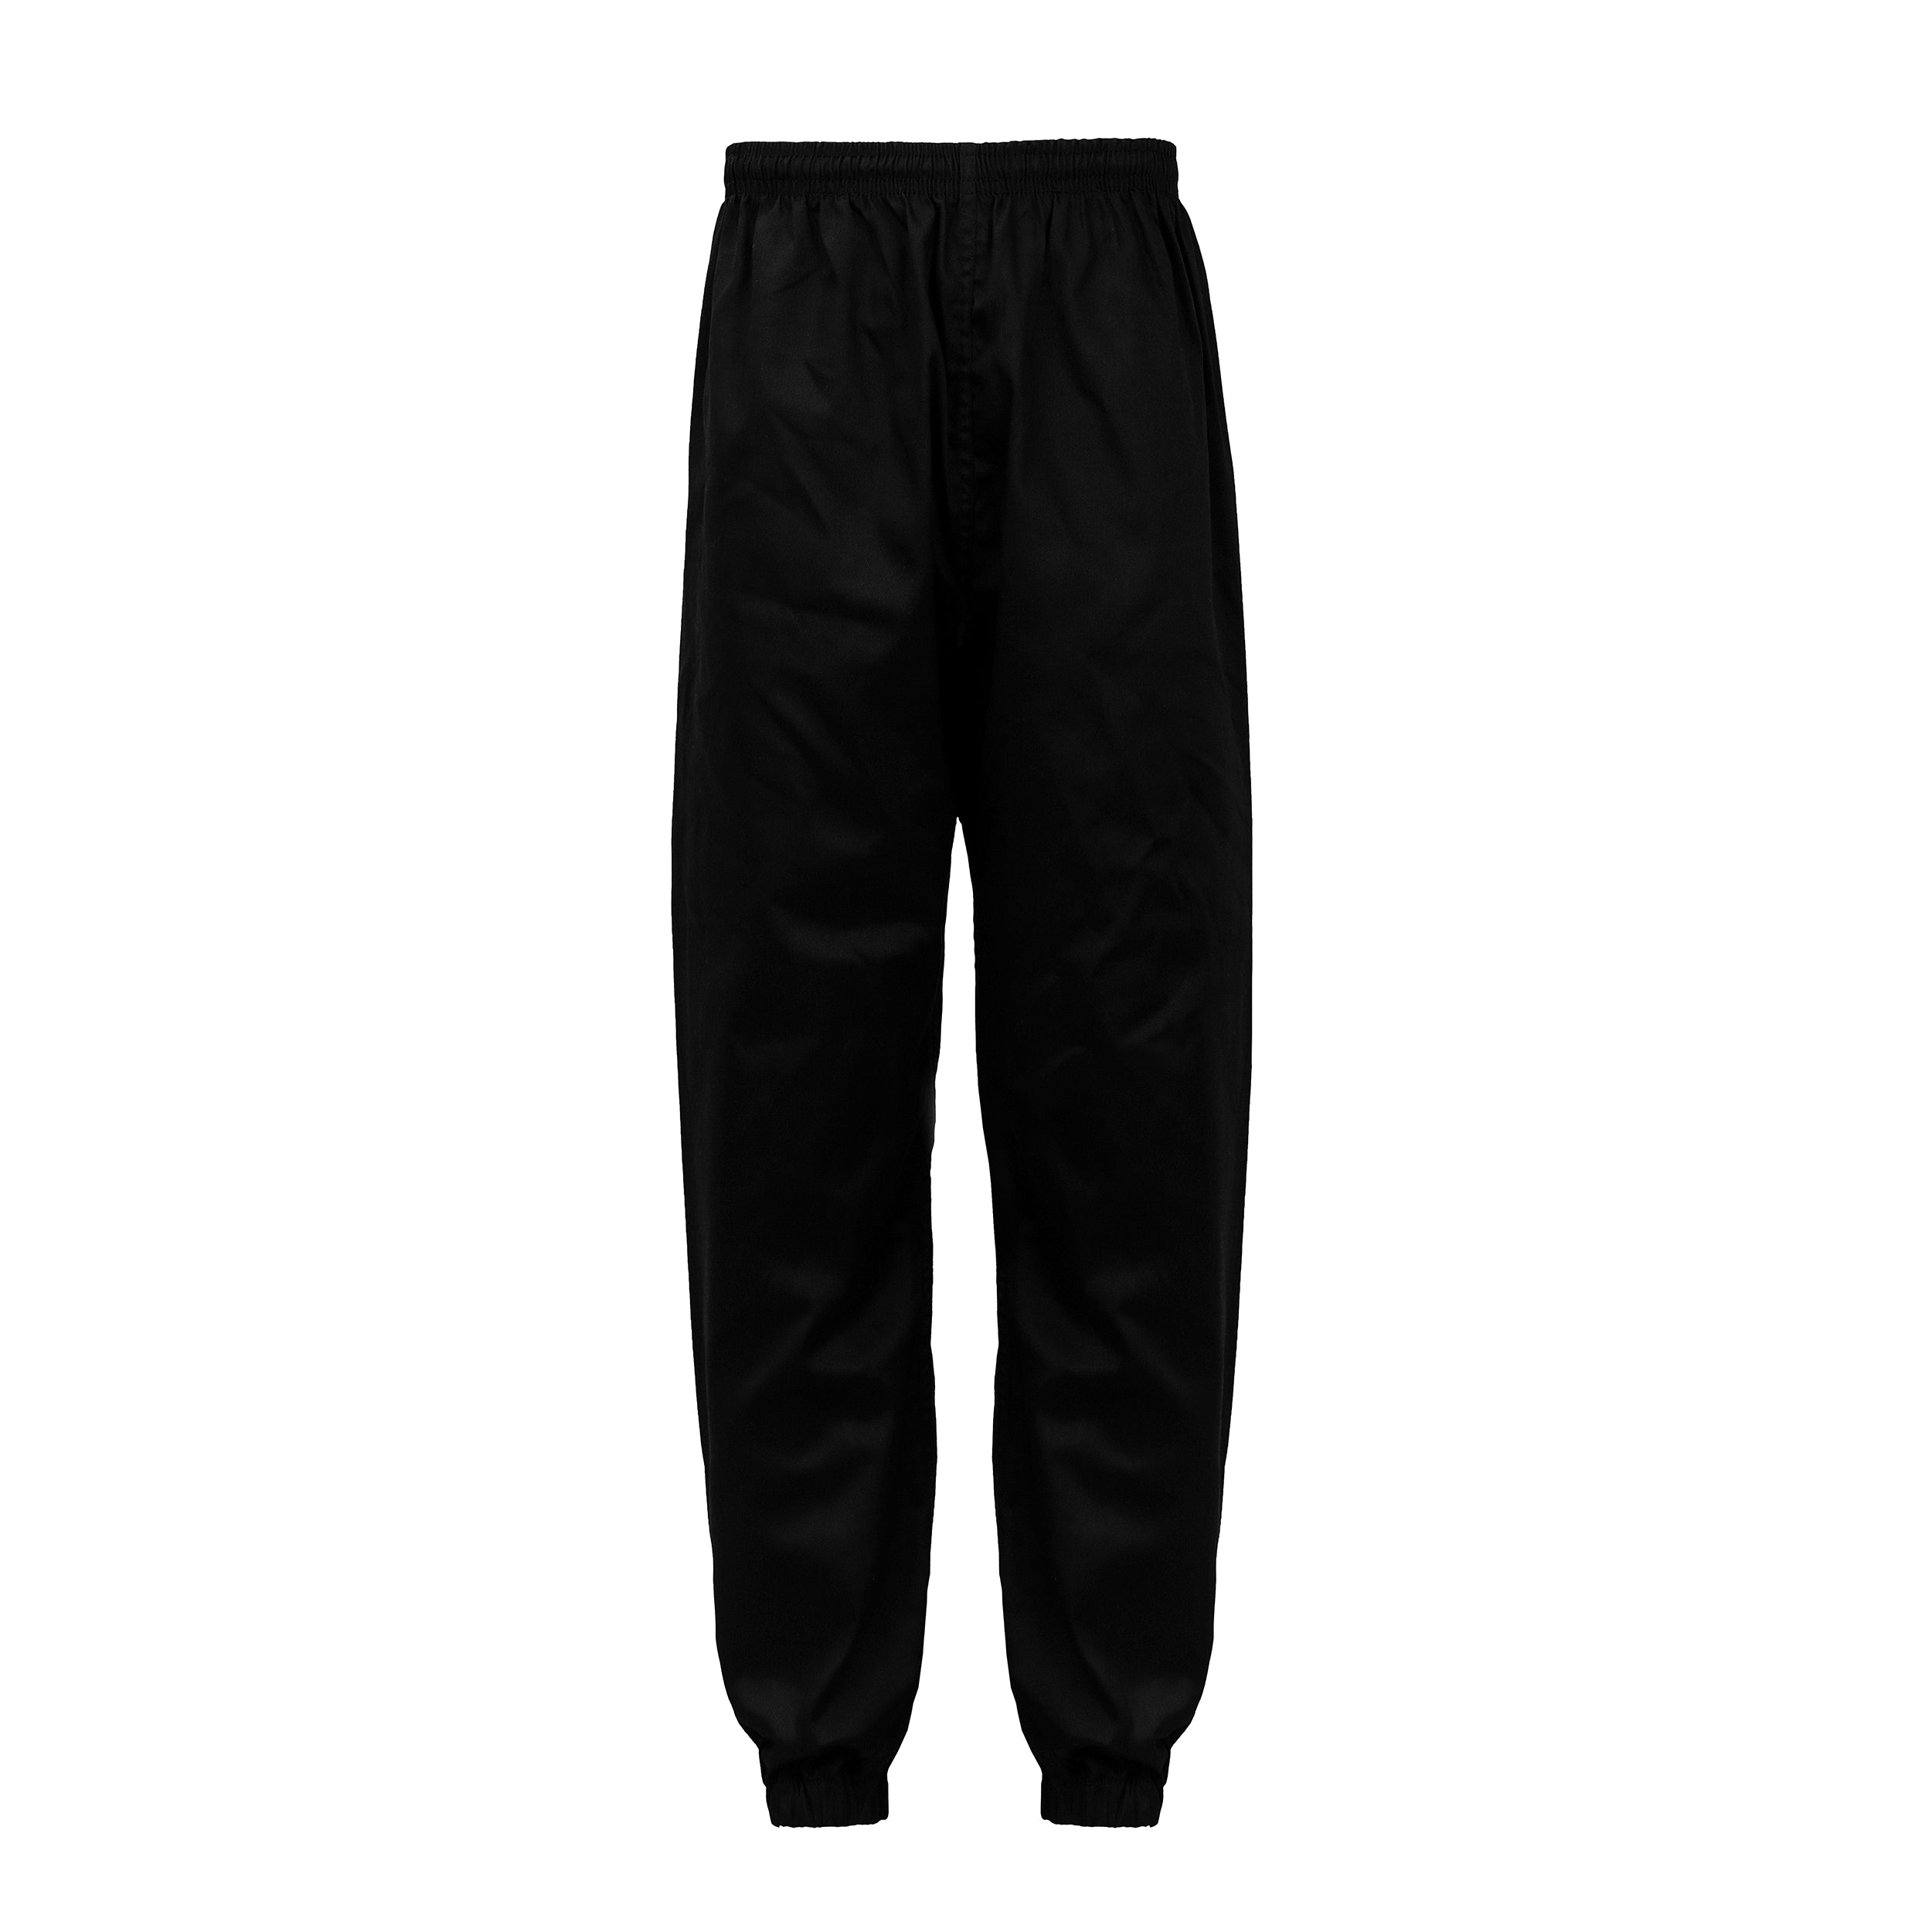 Kung Fu Pant Cotton Polyester Blended Less Wrinkle Tailored Fitting UFG Ultimate 